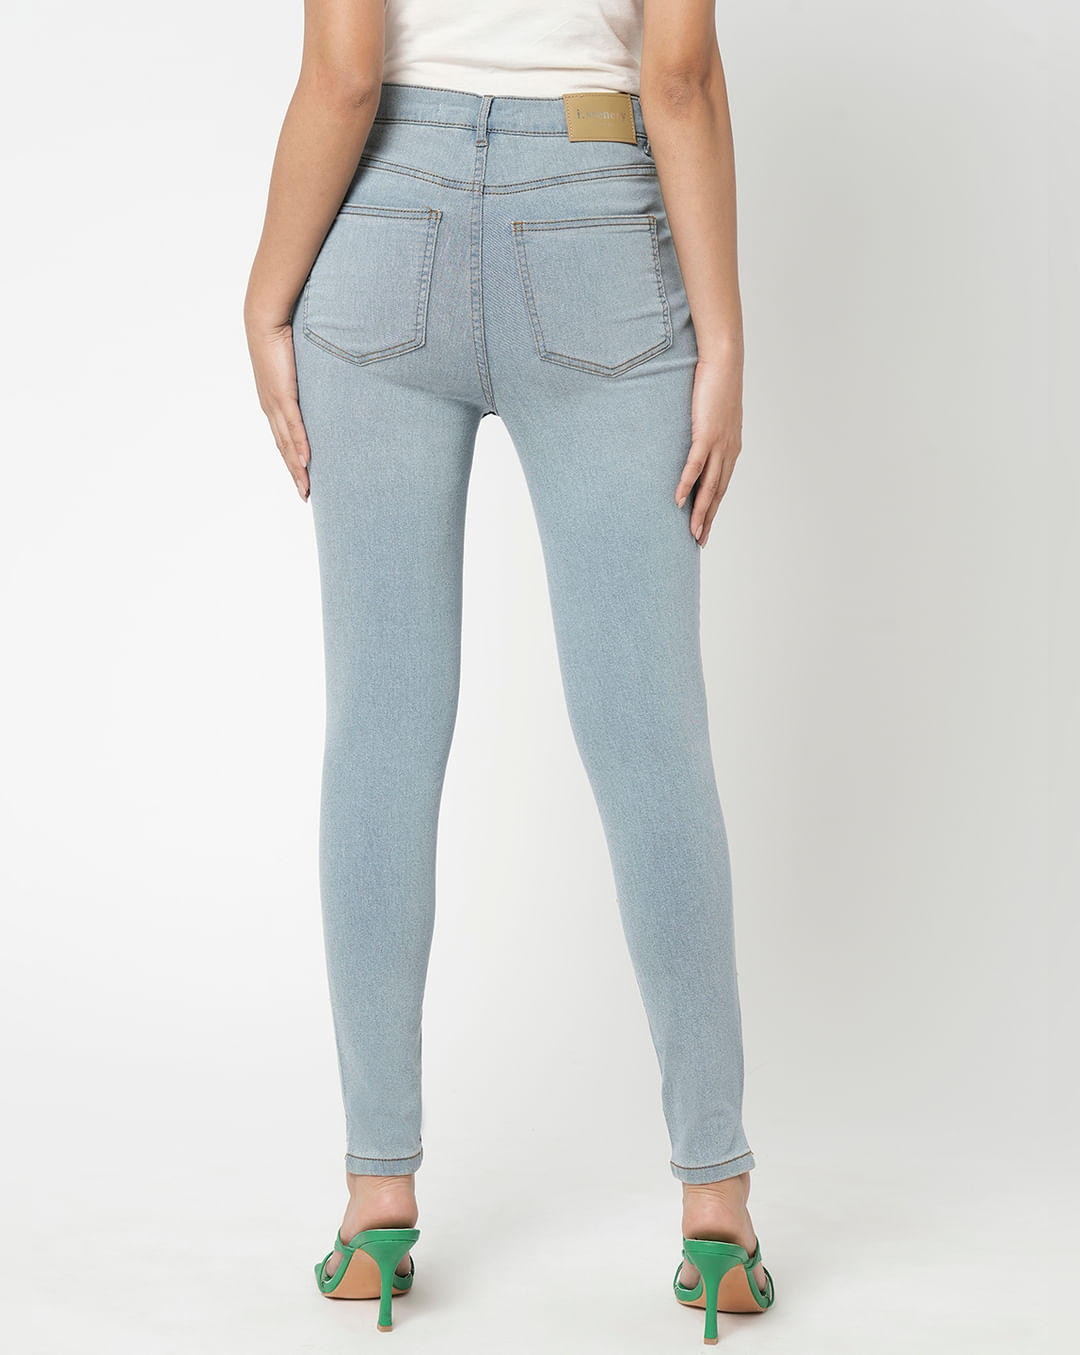 JDY by ONLY Dark Blue High Rise Skinny Fit Jeggings